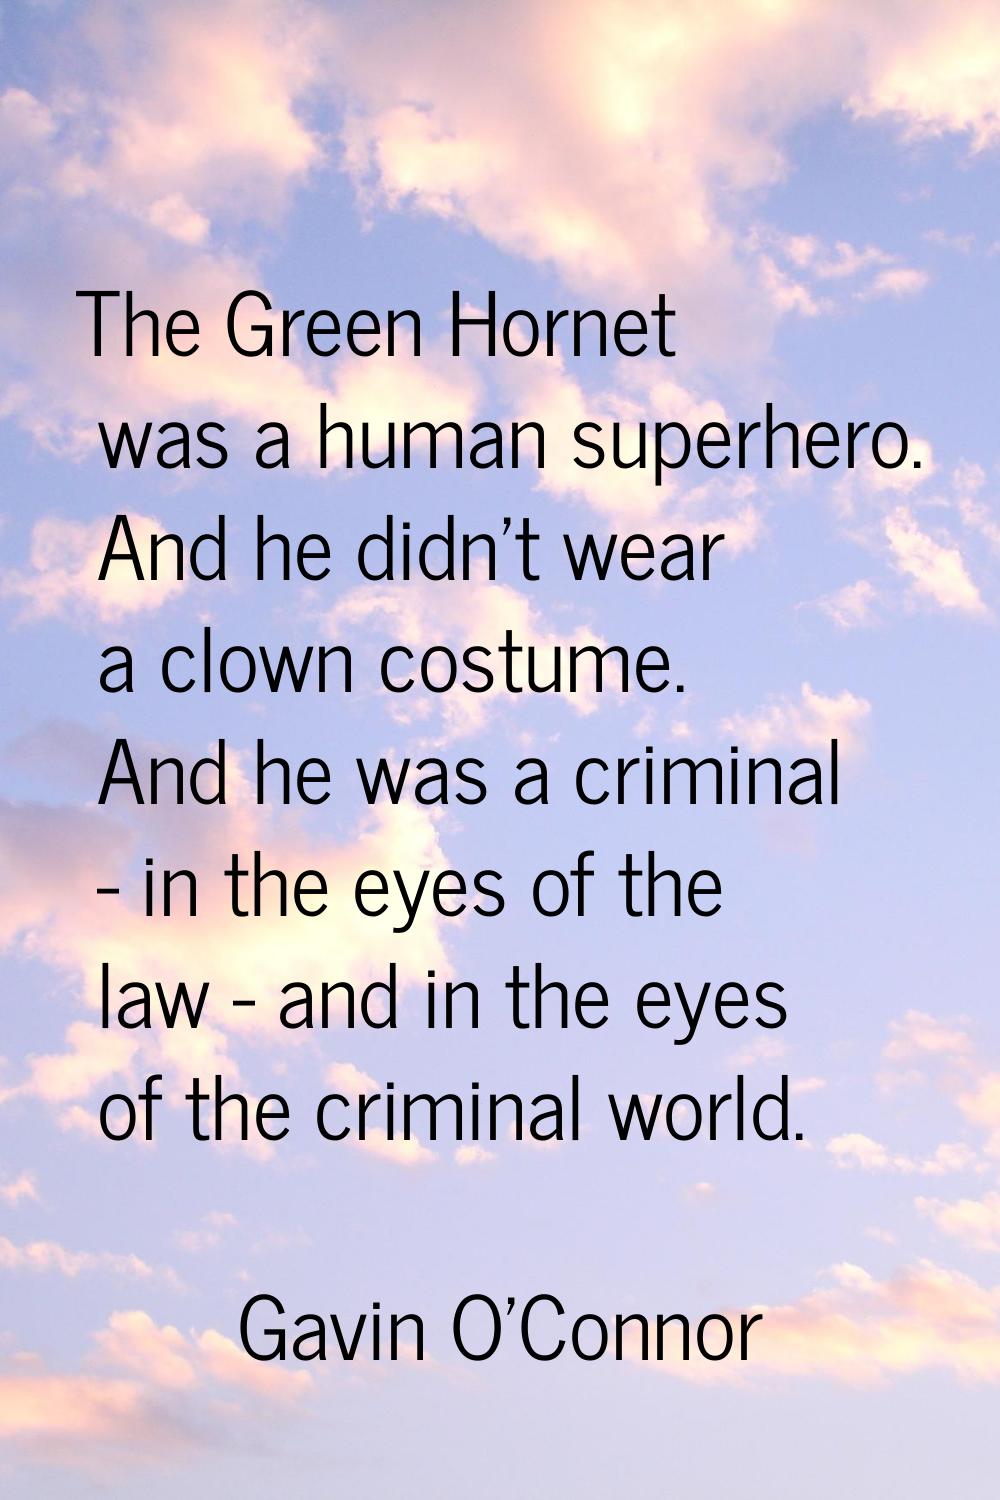 The Green Hornet was a human superhero. And he didn't wear a clown costume. And he was a criminal -